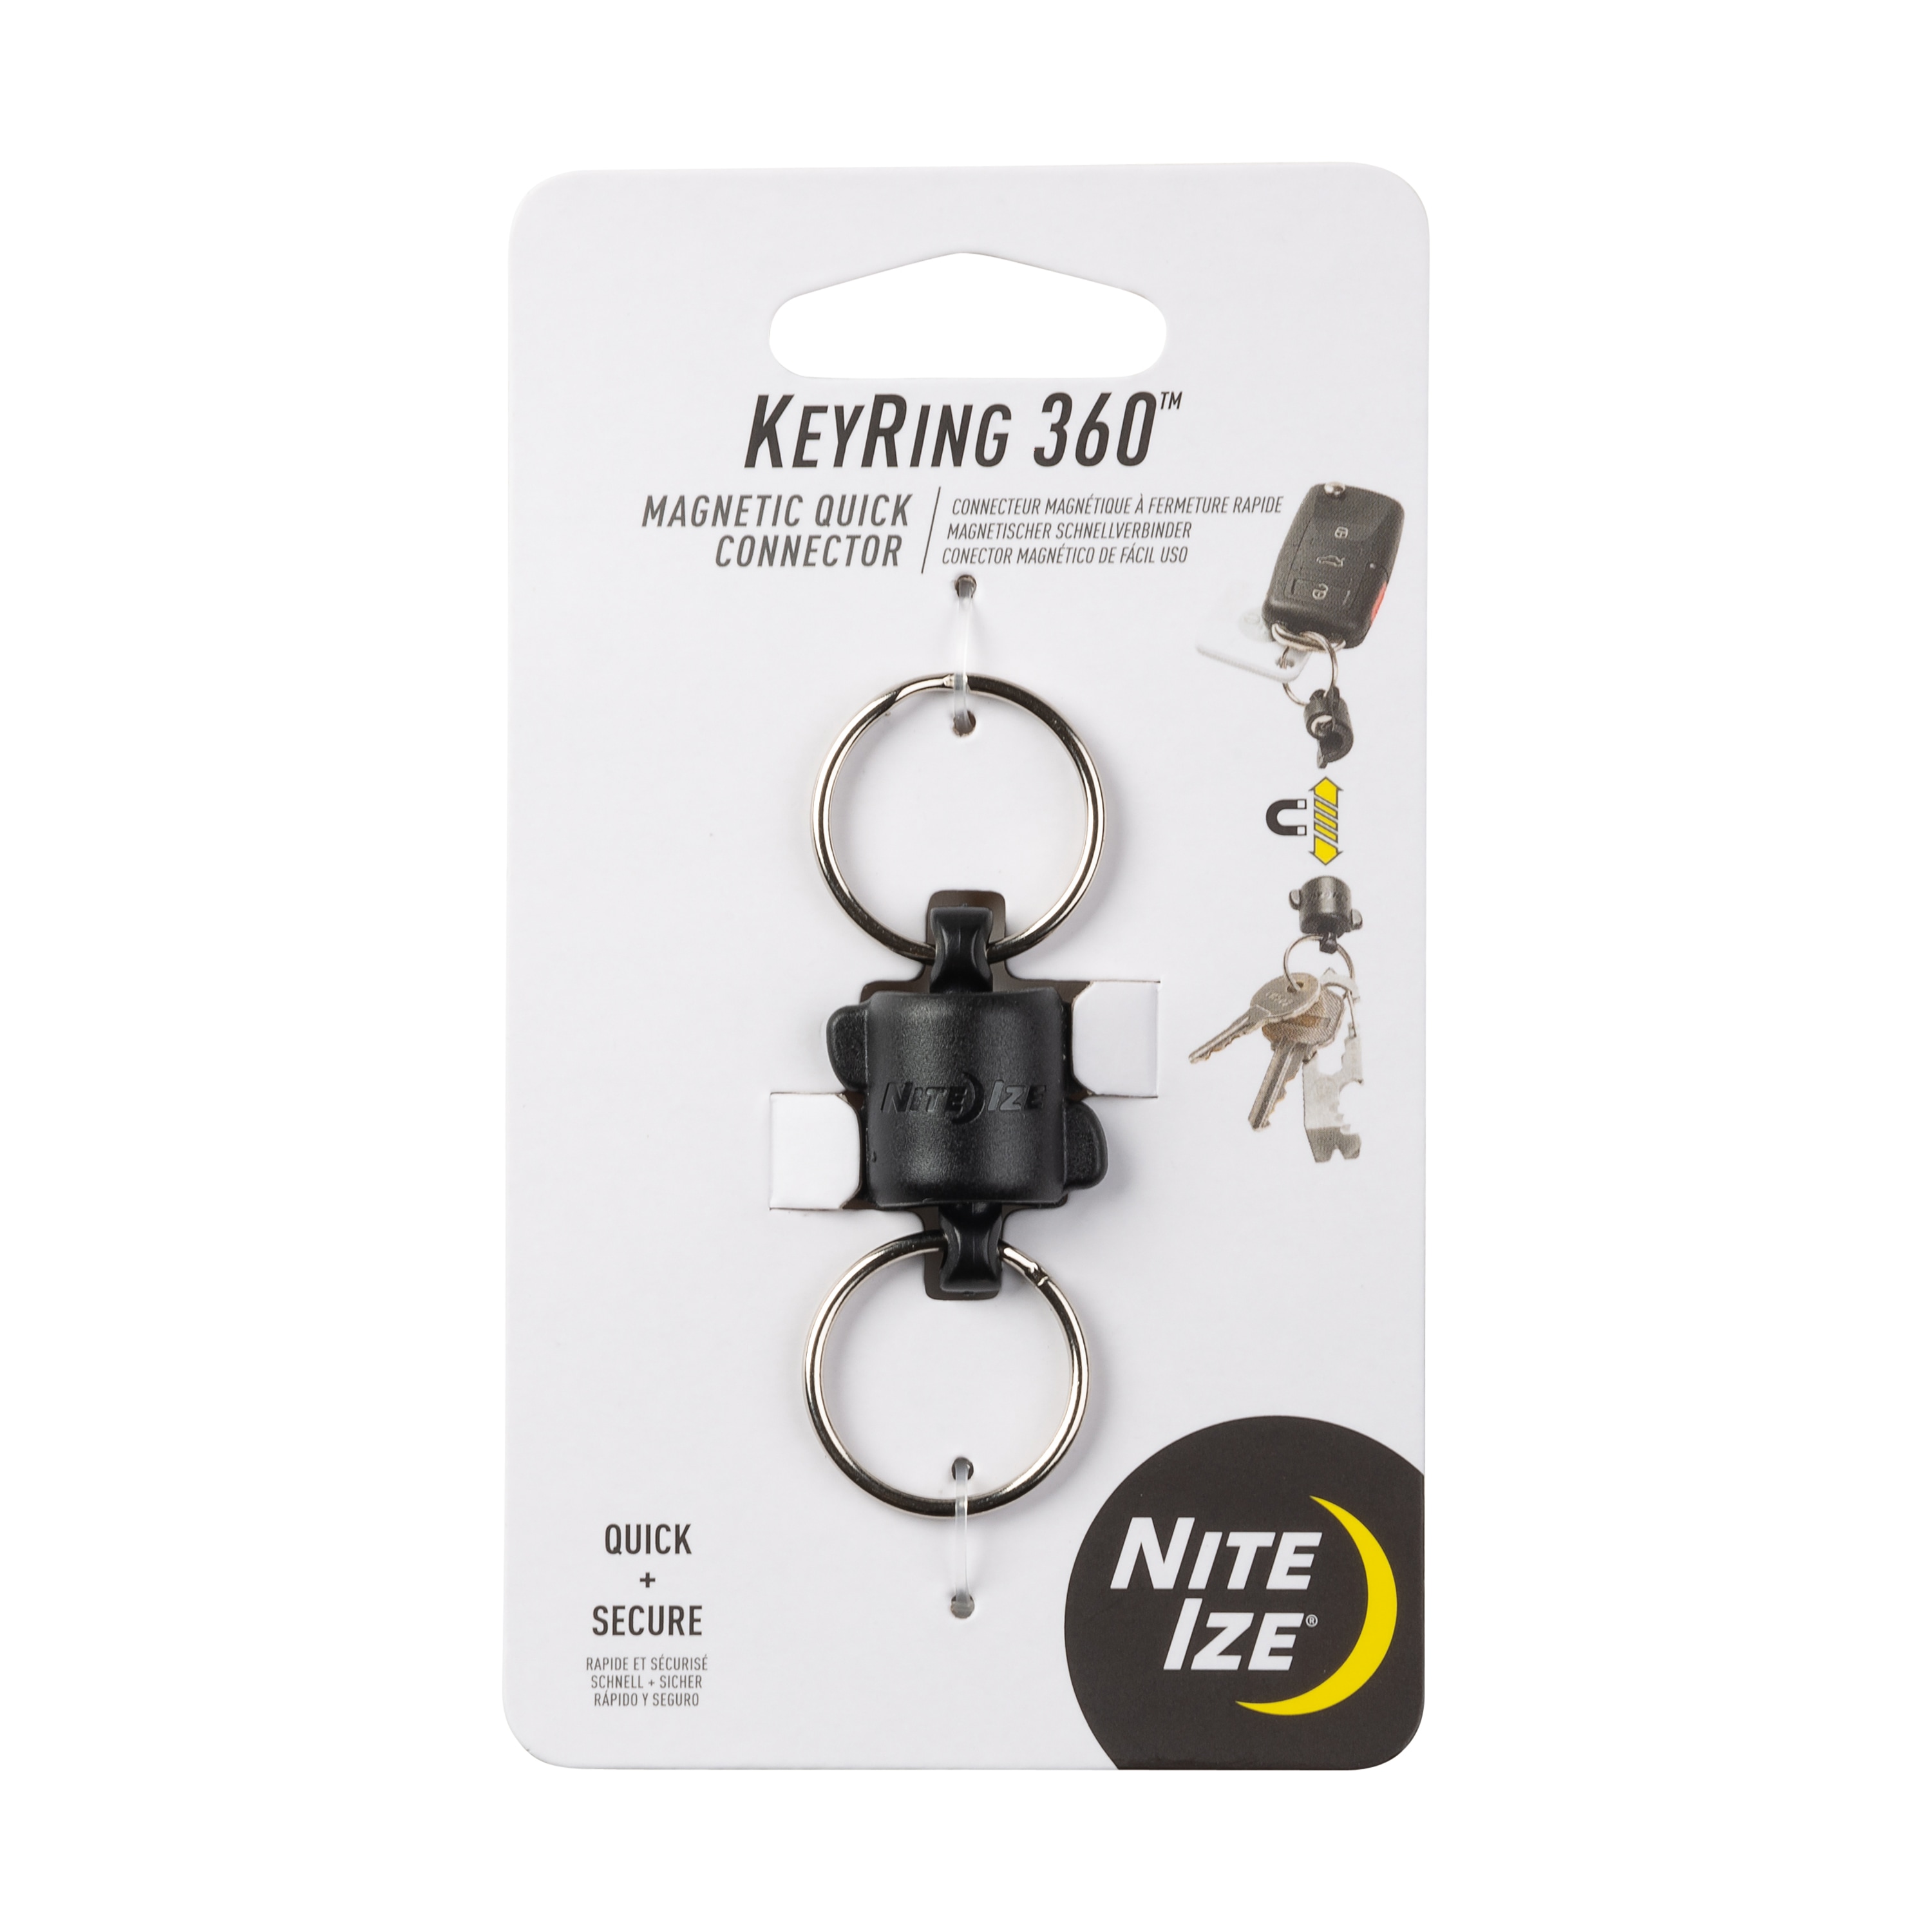 Nite Ize KeyRing 360 Magnetic Quick Connector with Dual Split